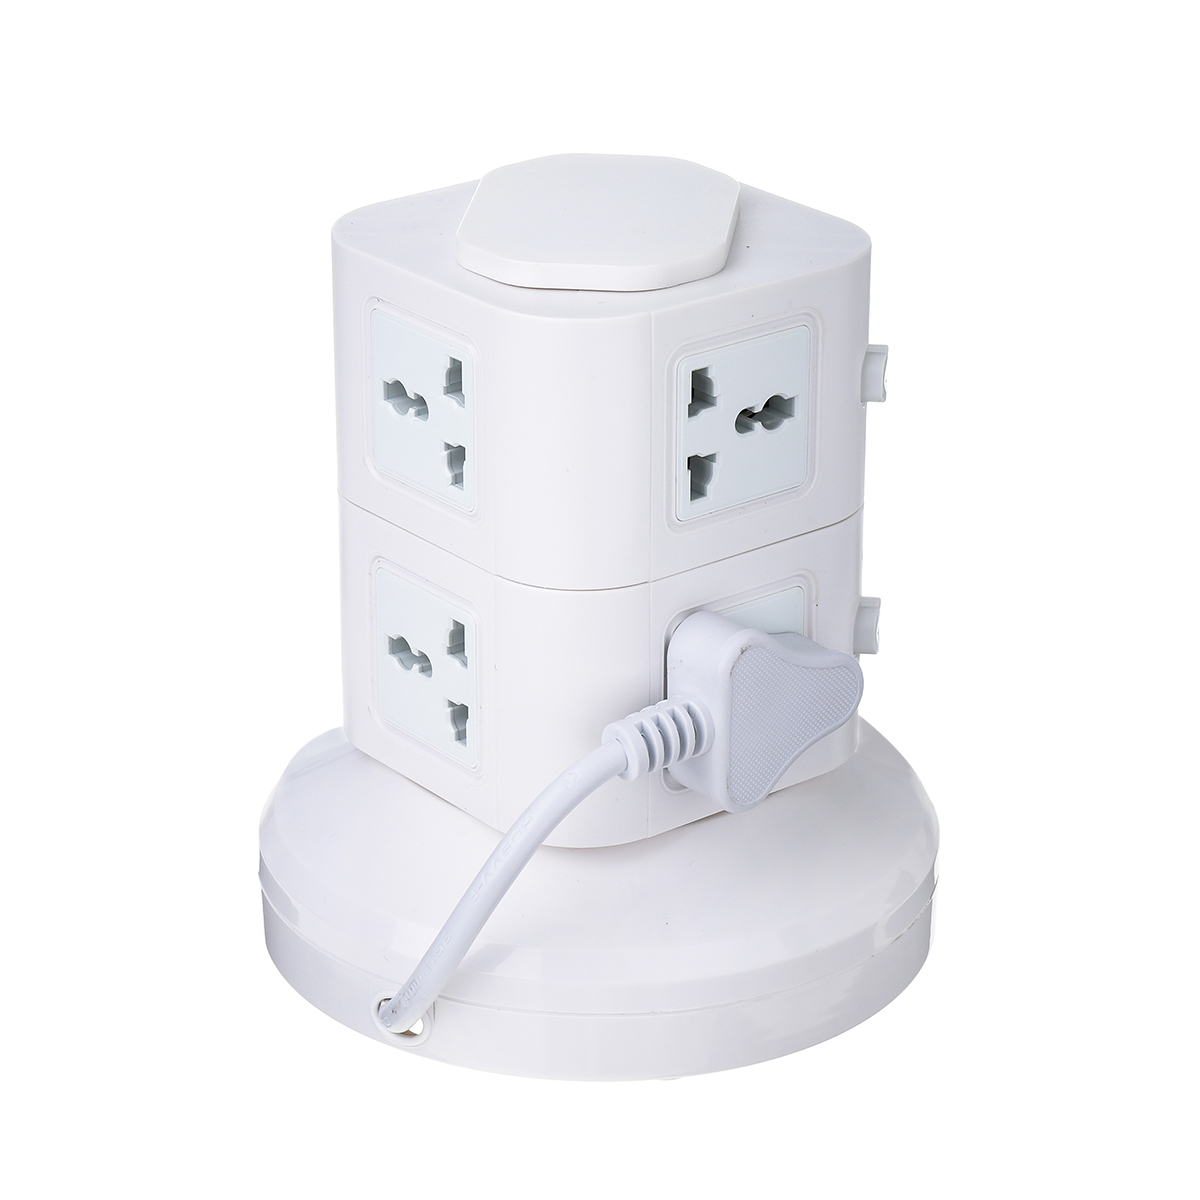 Vertical-Power-Socket-Powerboard-Outlet-Plug-Extension-Multi-USB-Ports-Charger-Socket-Power-Strip-1515996-6